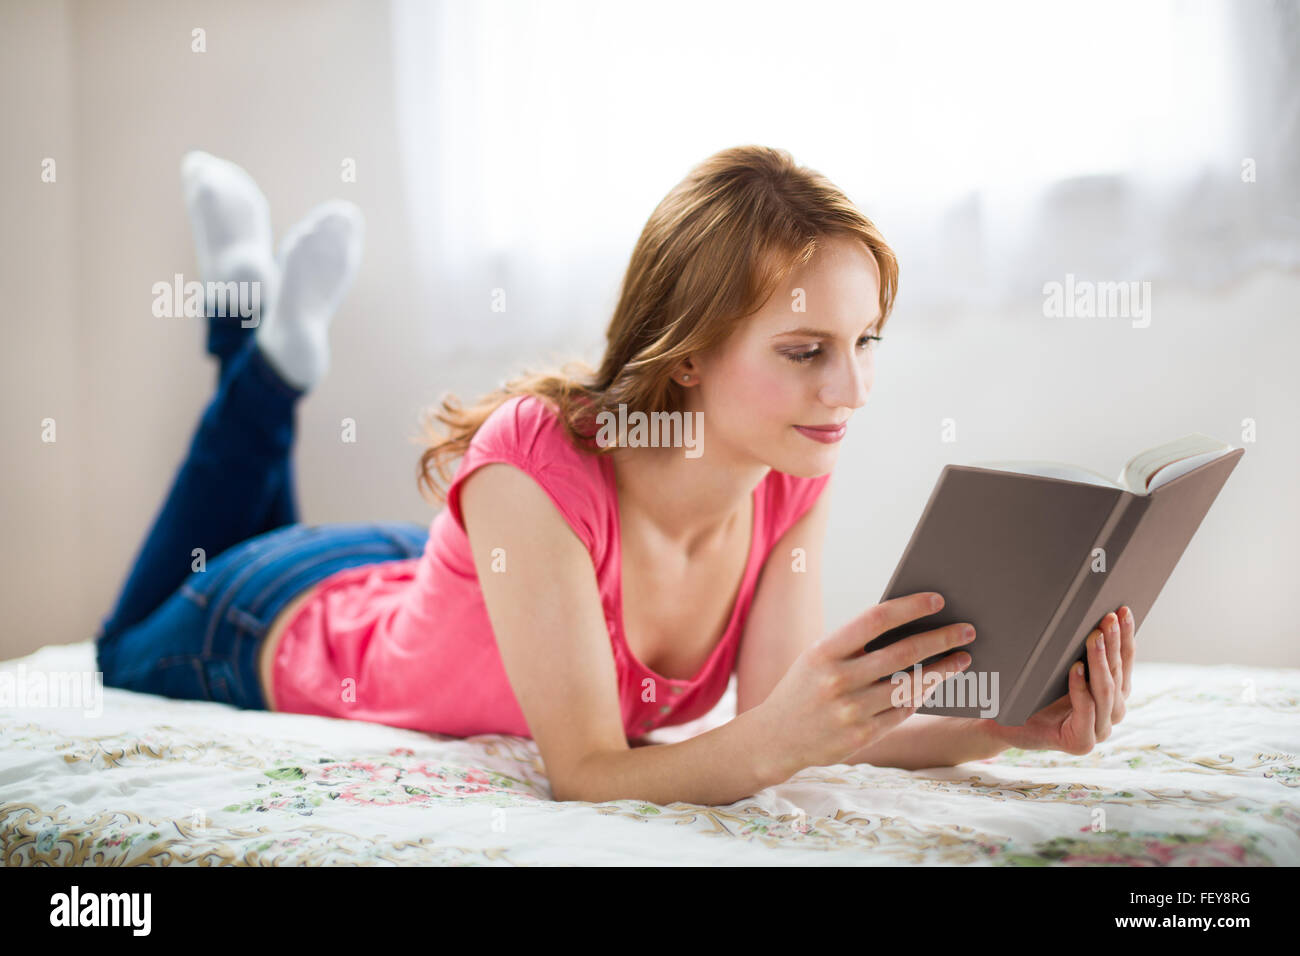 Relaxing woman reading book with a smile in white interior Stock Photo